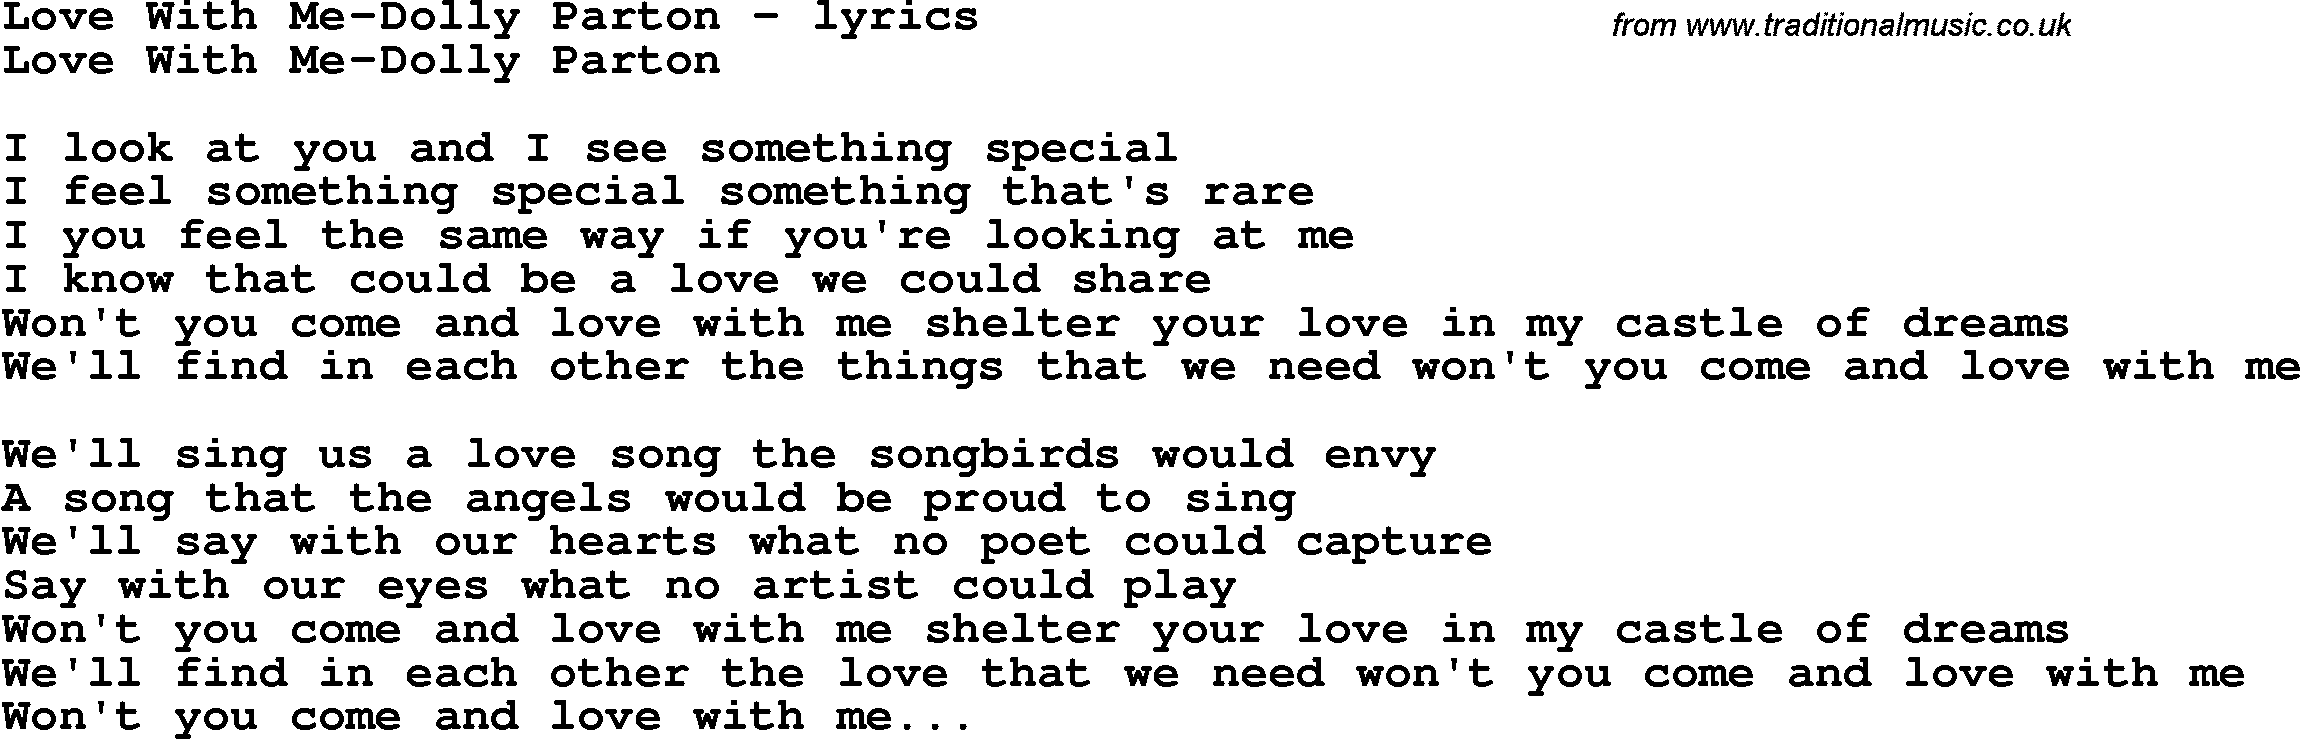 Love Song Lyrics for: Love With Me-Dolly Parton